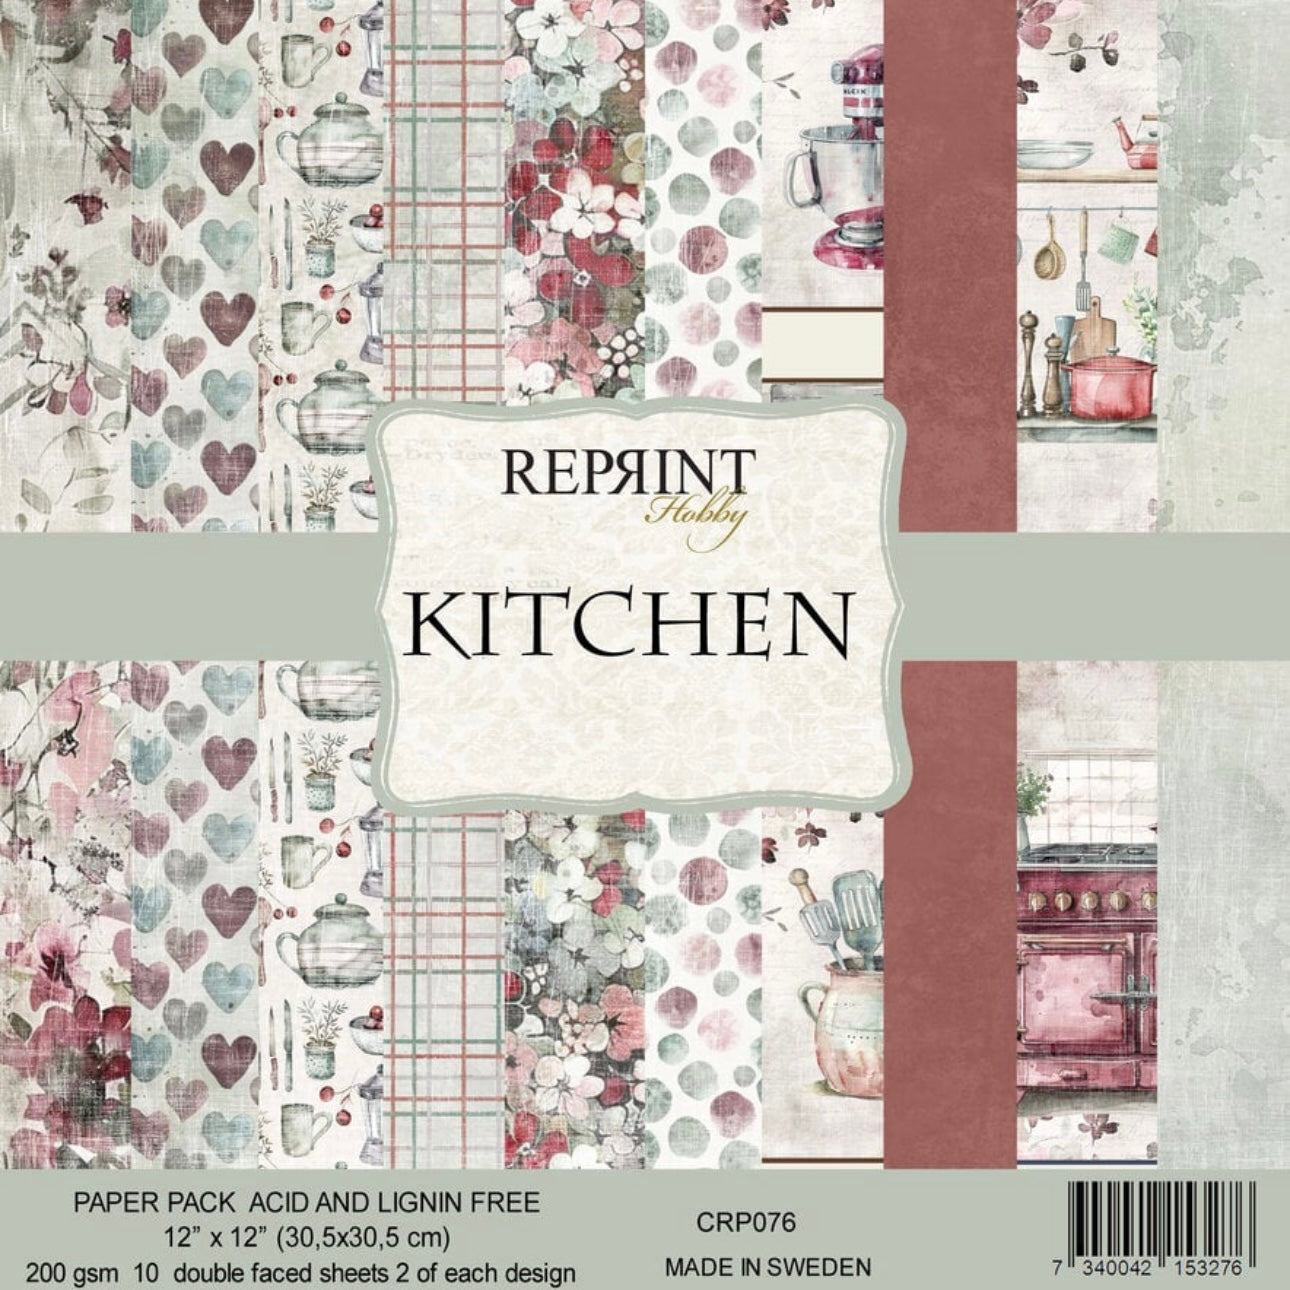 Kitchen Paper Packs - 6 8 and 12 inch options